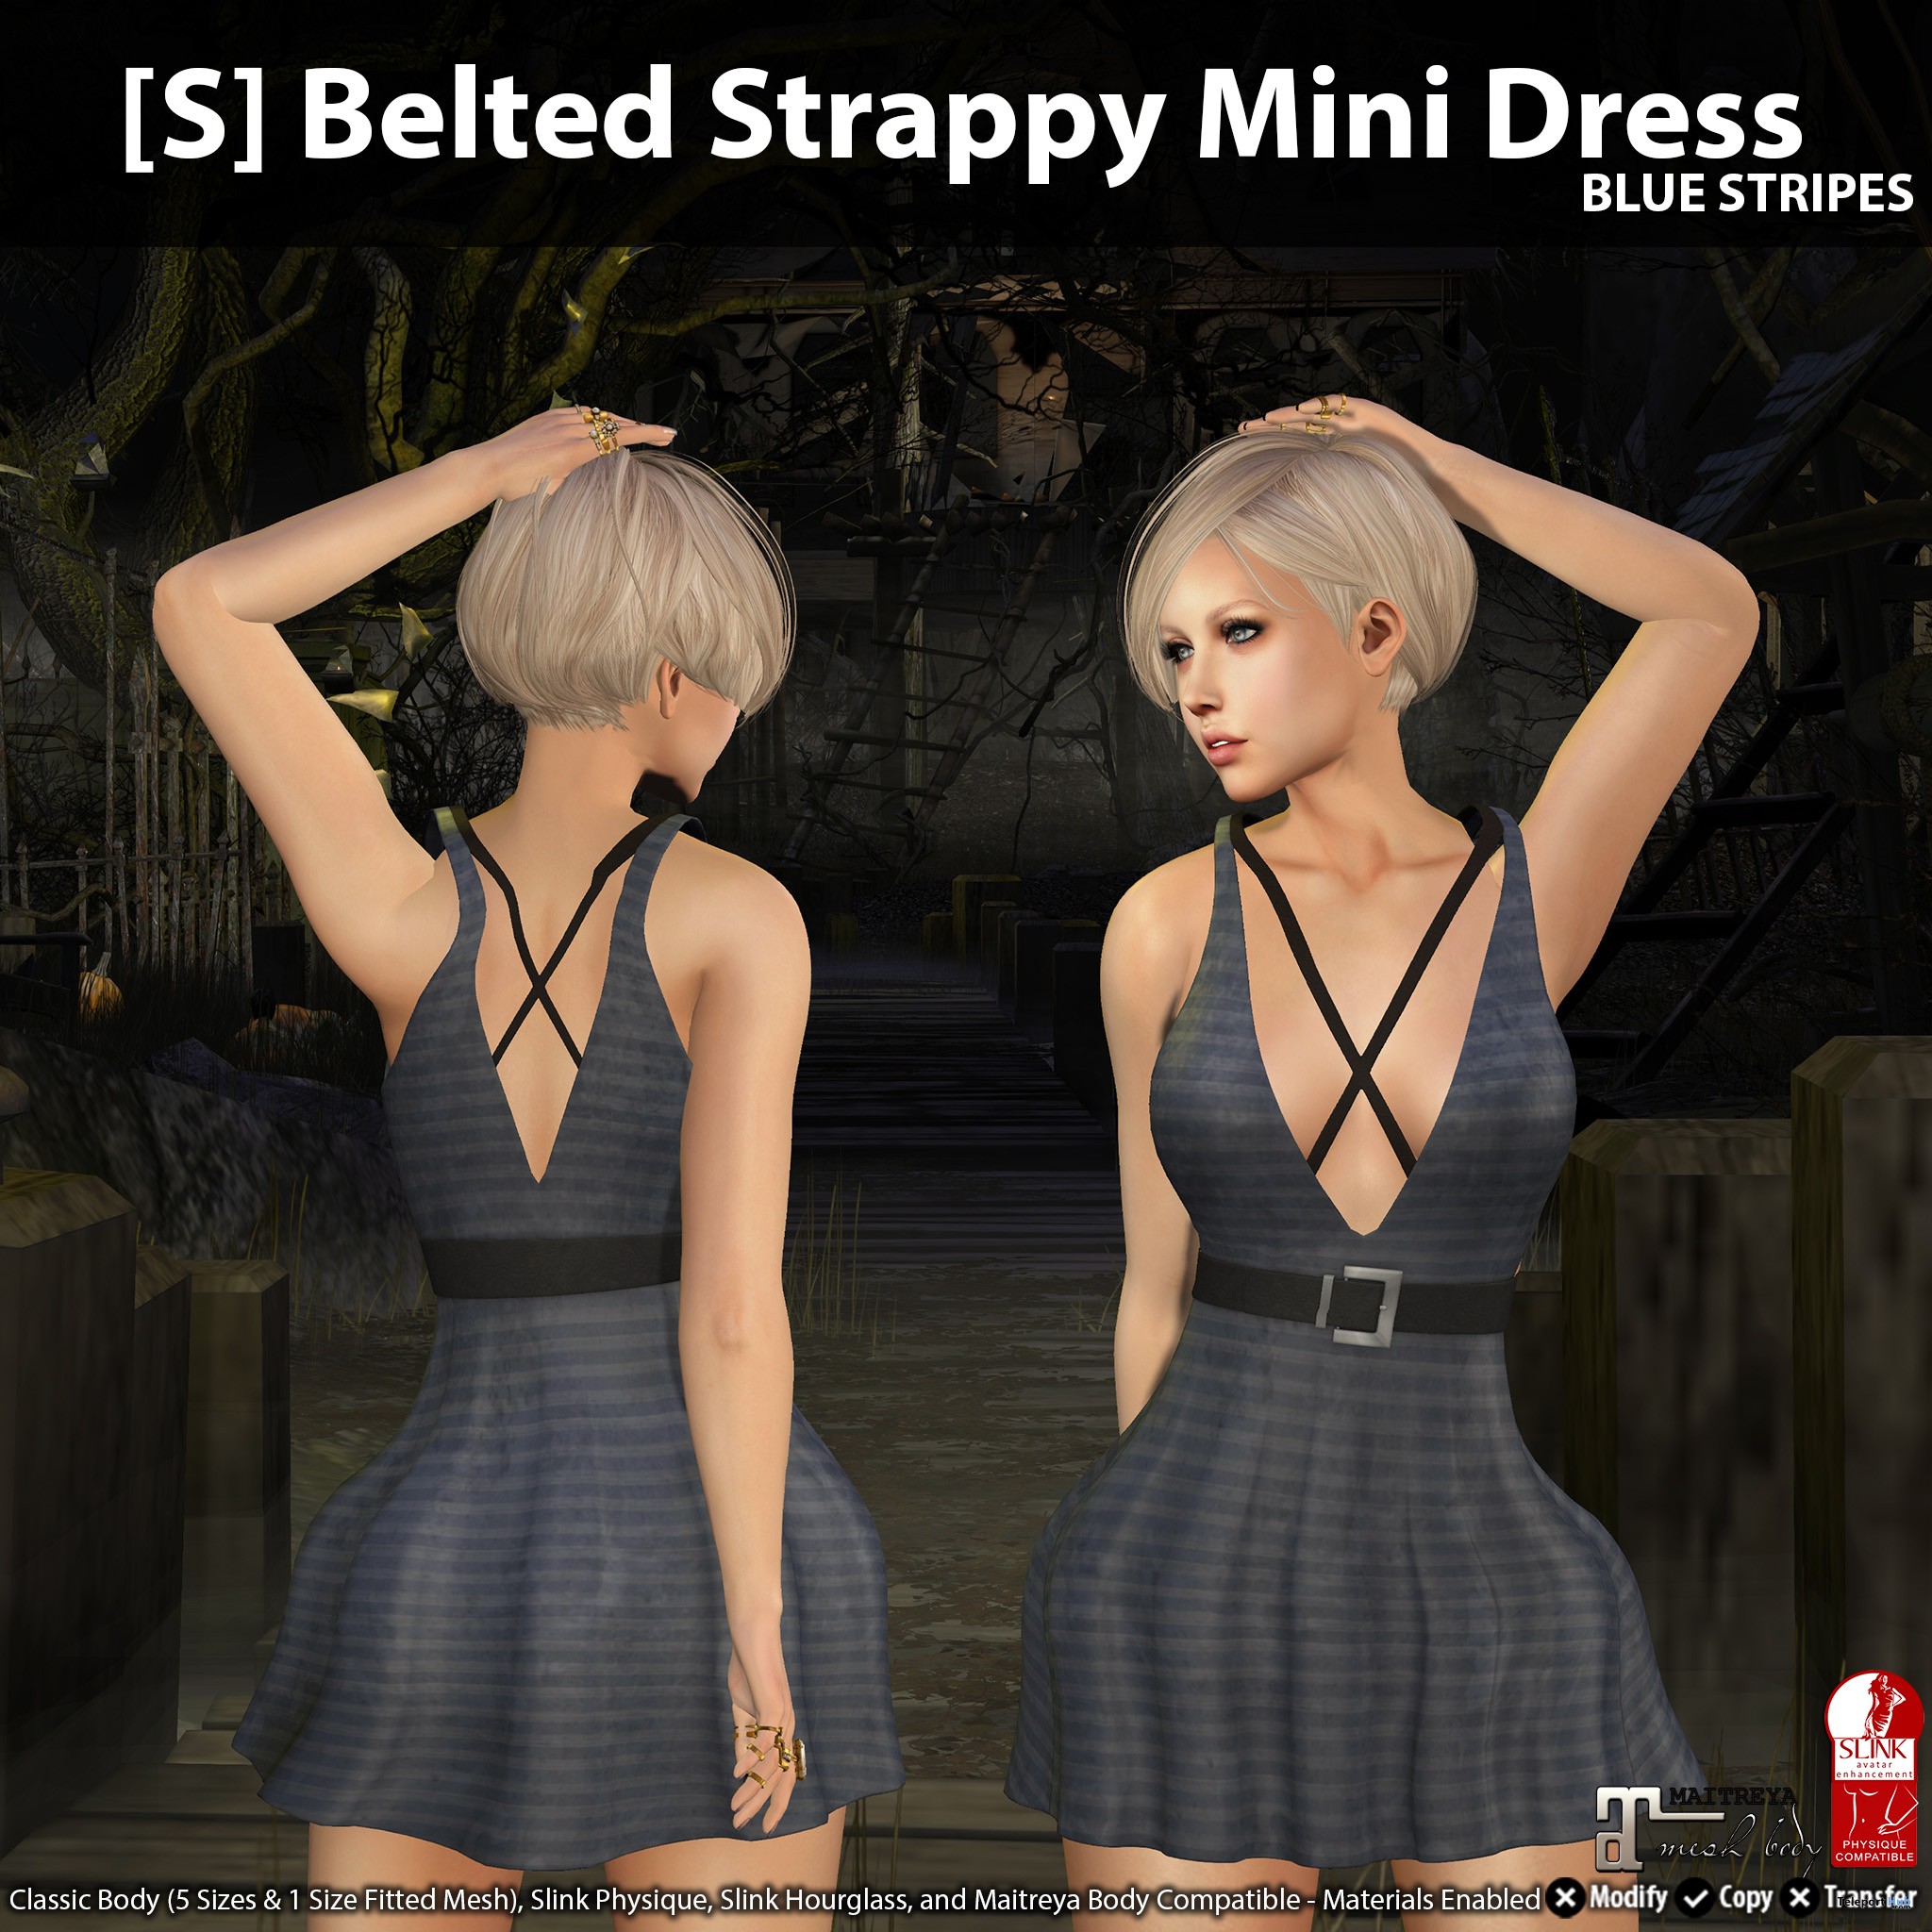 New Release: [S] Belted Strappy Mini Dress by [satus Inc] - Teleport Hub - teleporthub.com